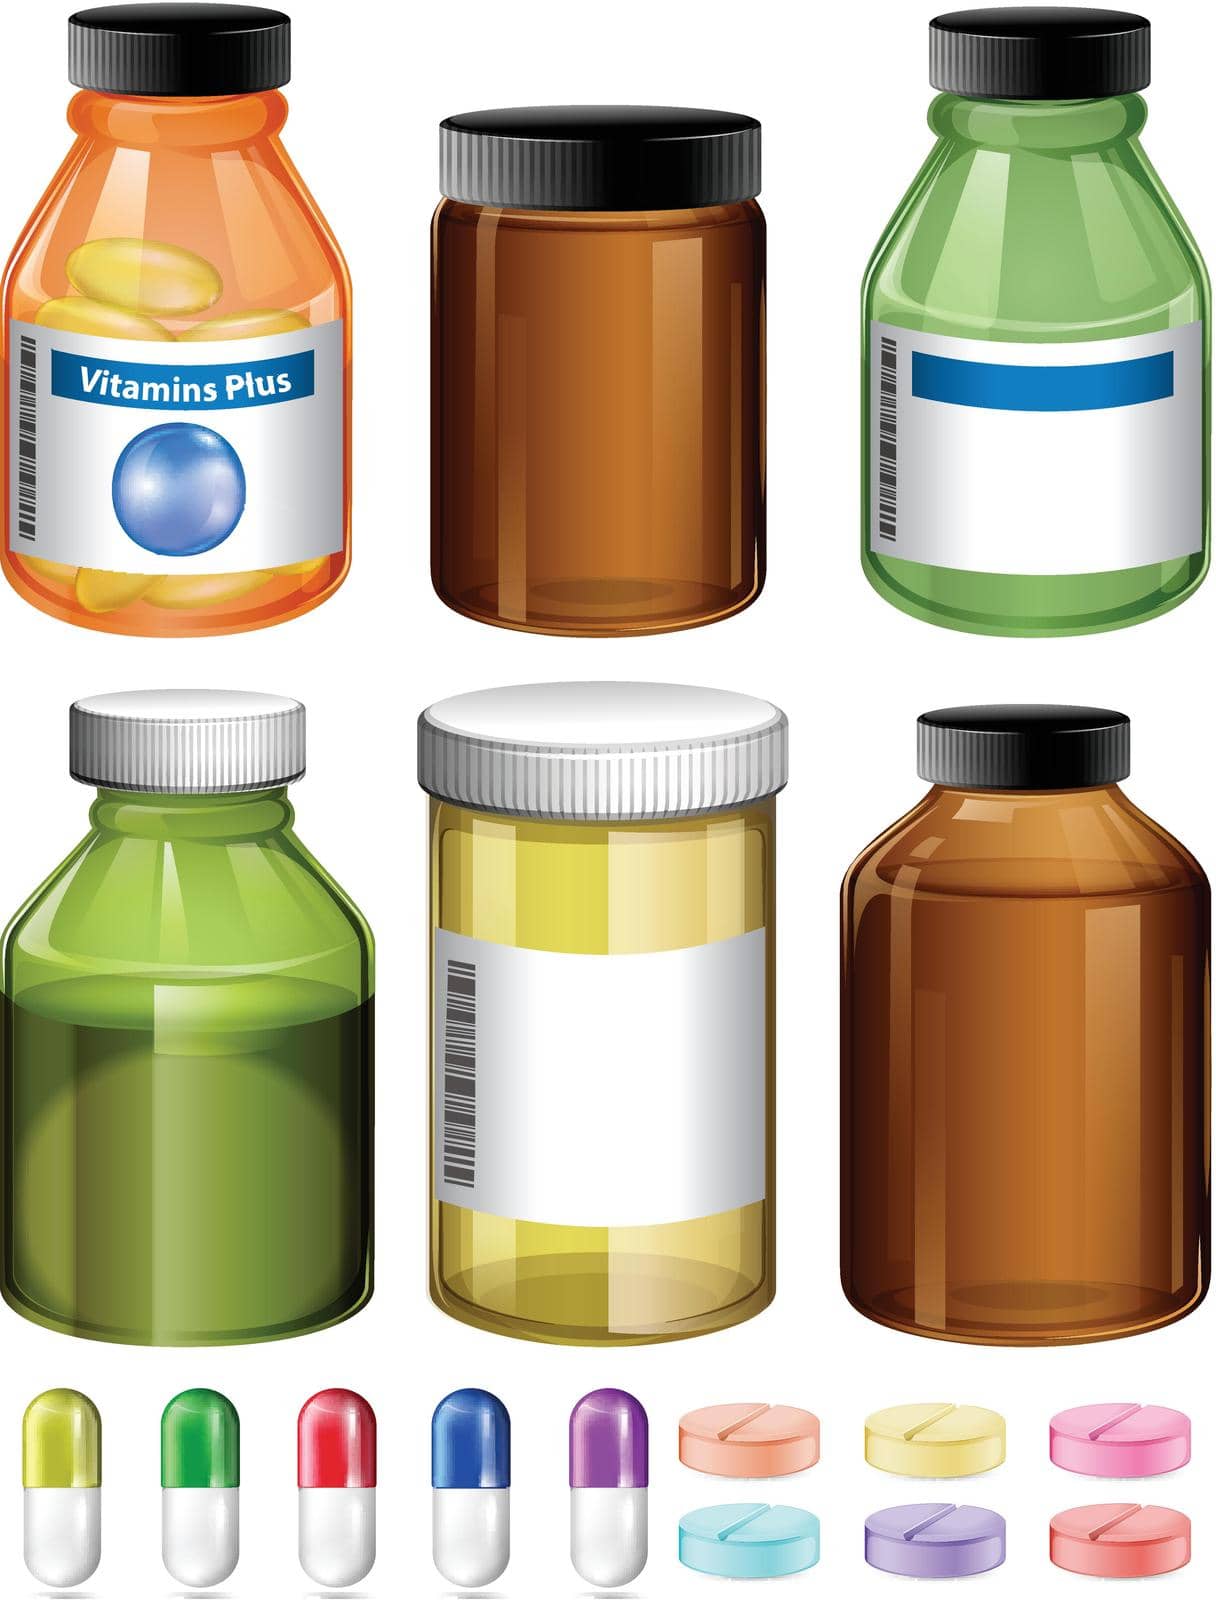 A set of medicine and container by iimages